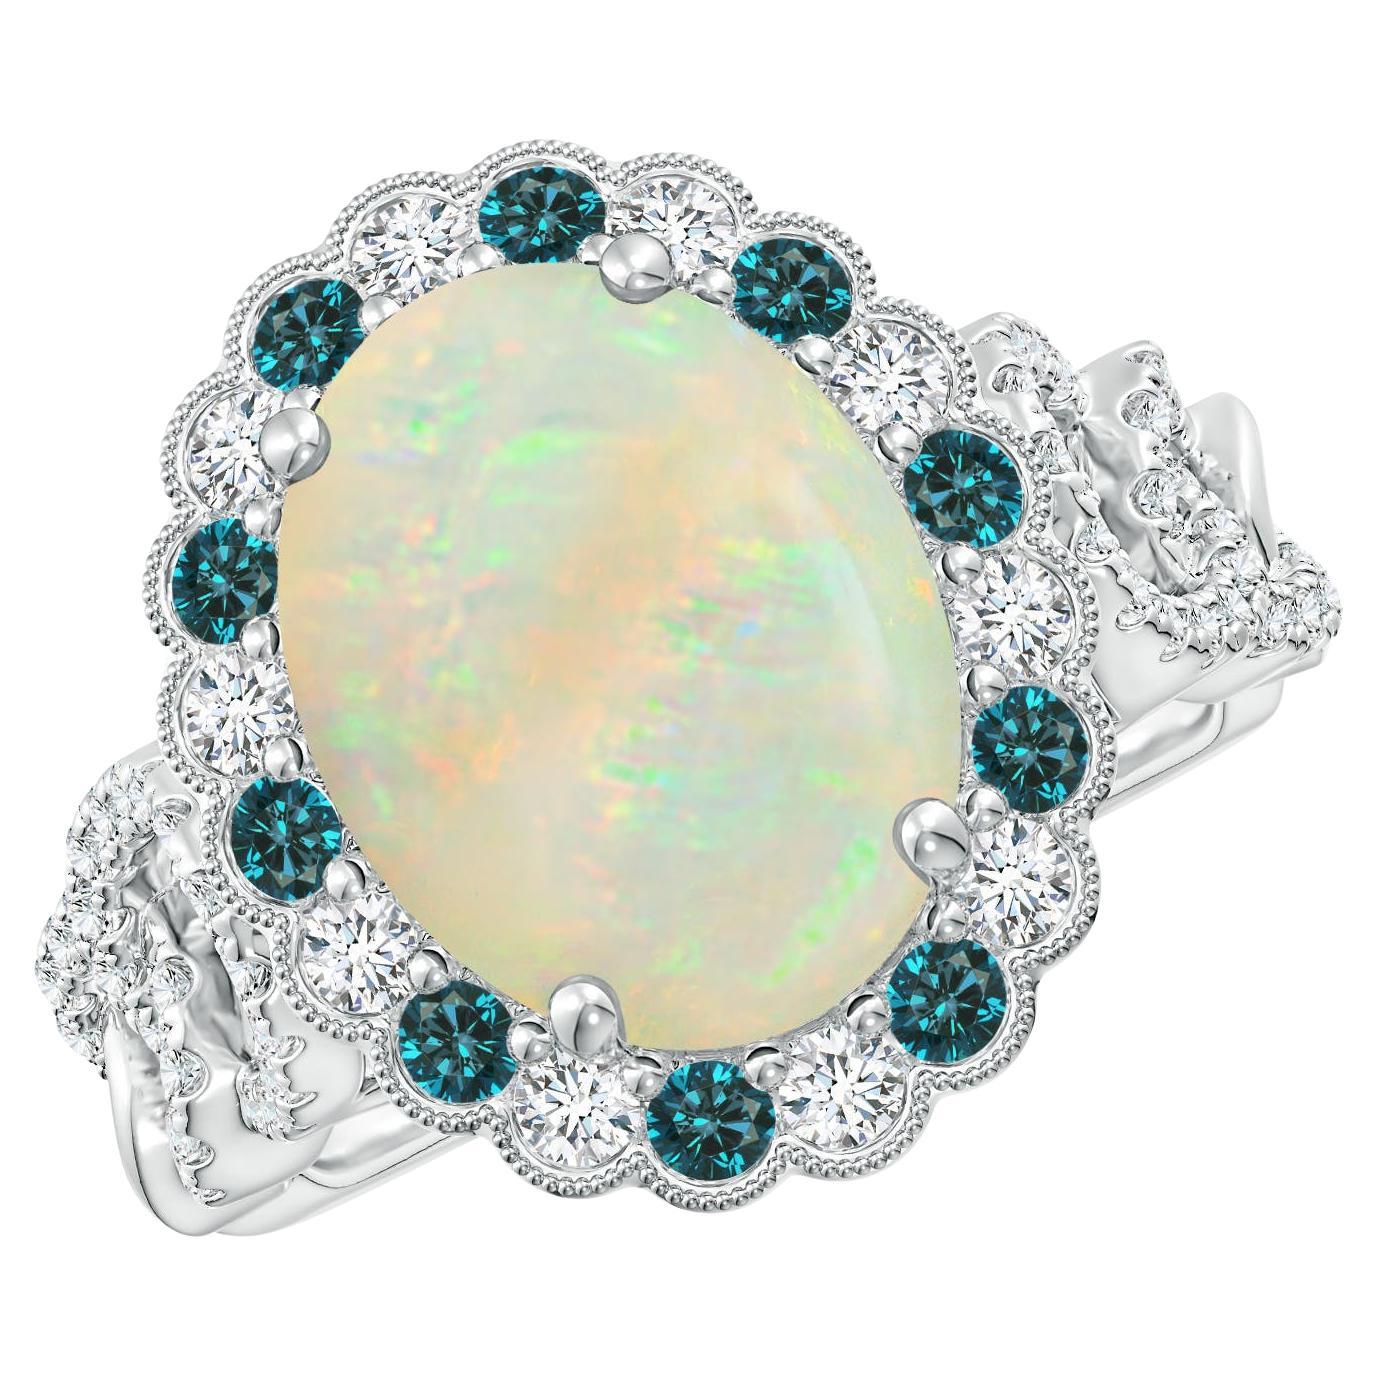 For Sale:  Angara GIA Certified Natural Opal Ring in White Gold with Blue & White Diamonds